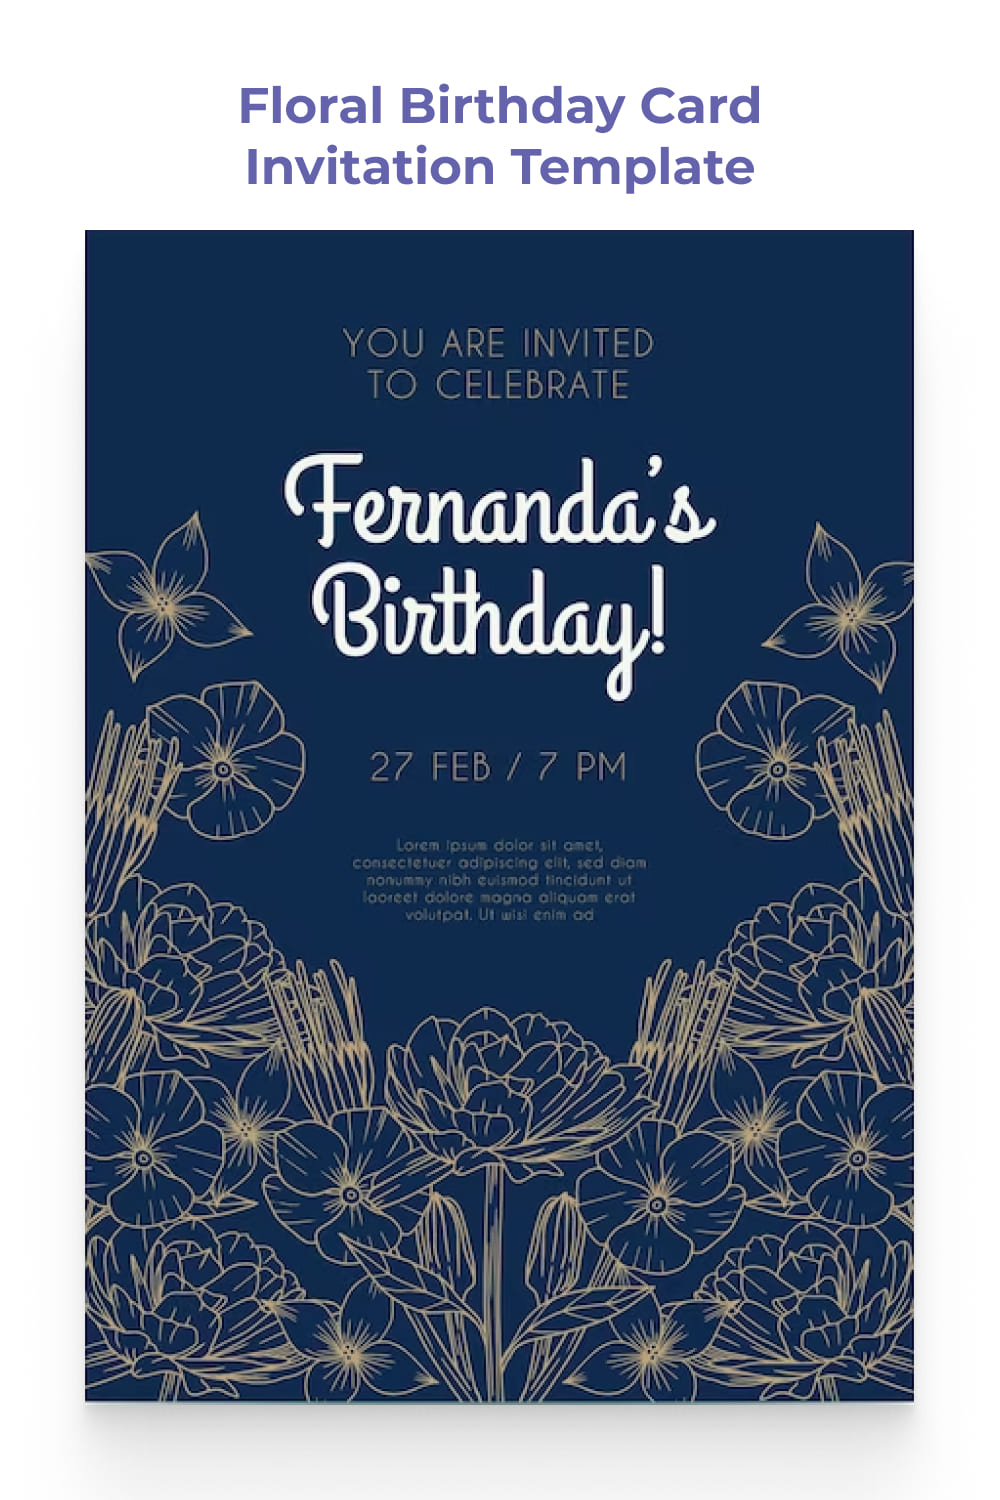 Birthday invitation with drawings of flowers on a blue background.